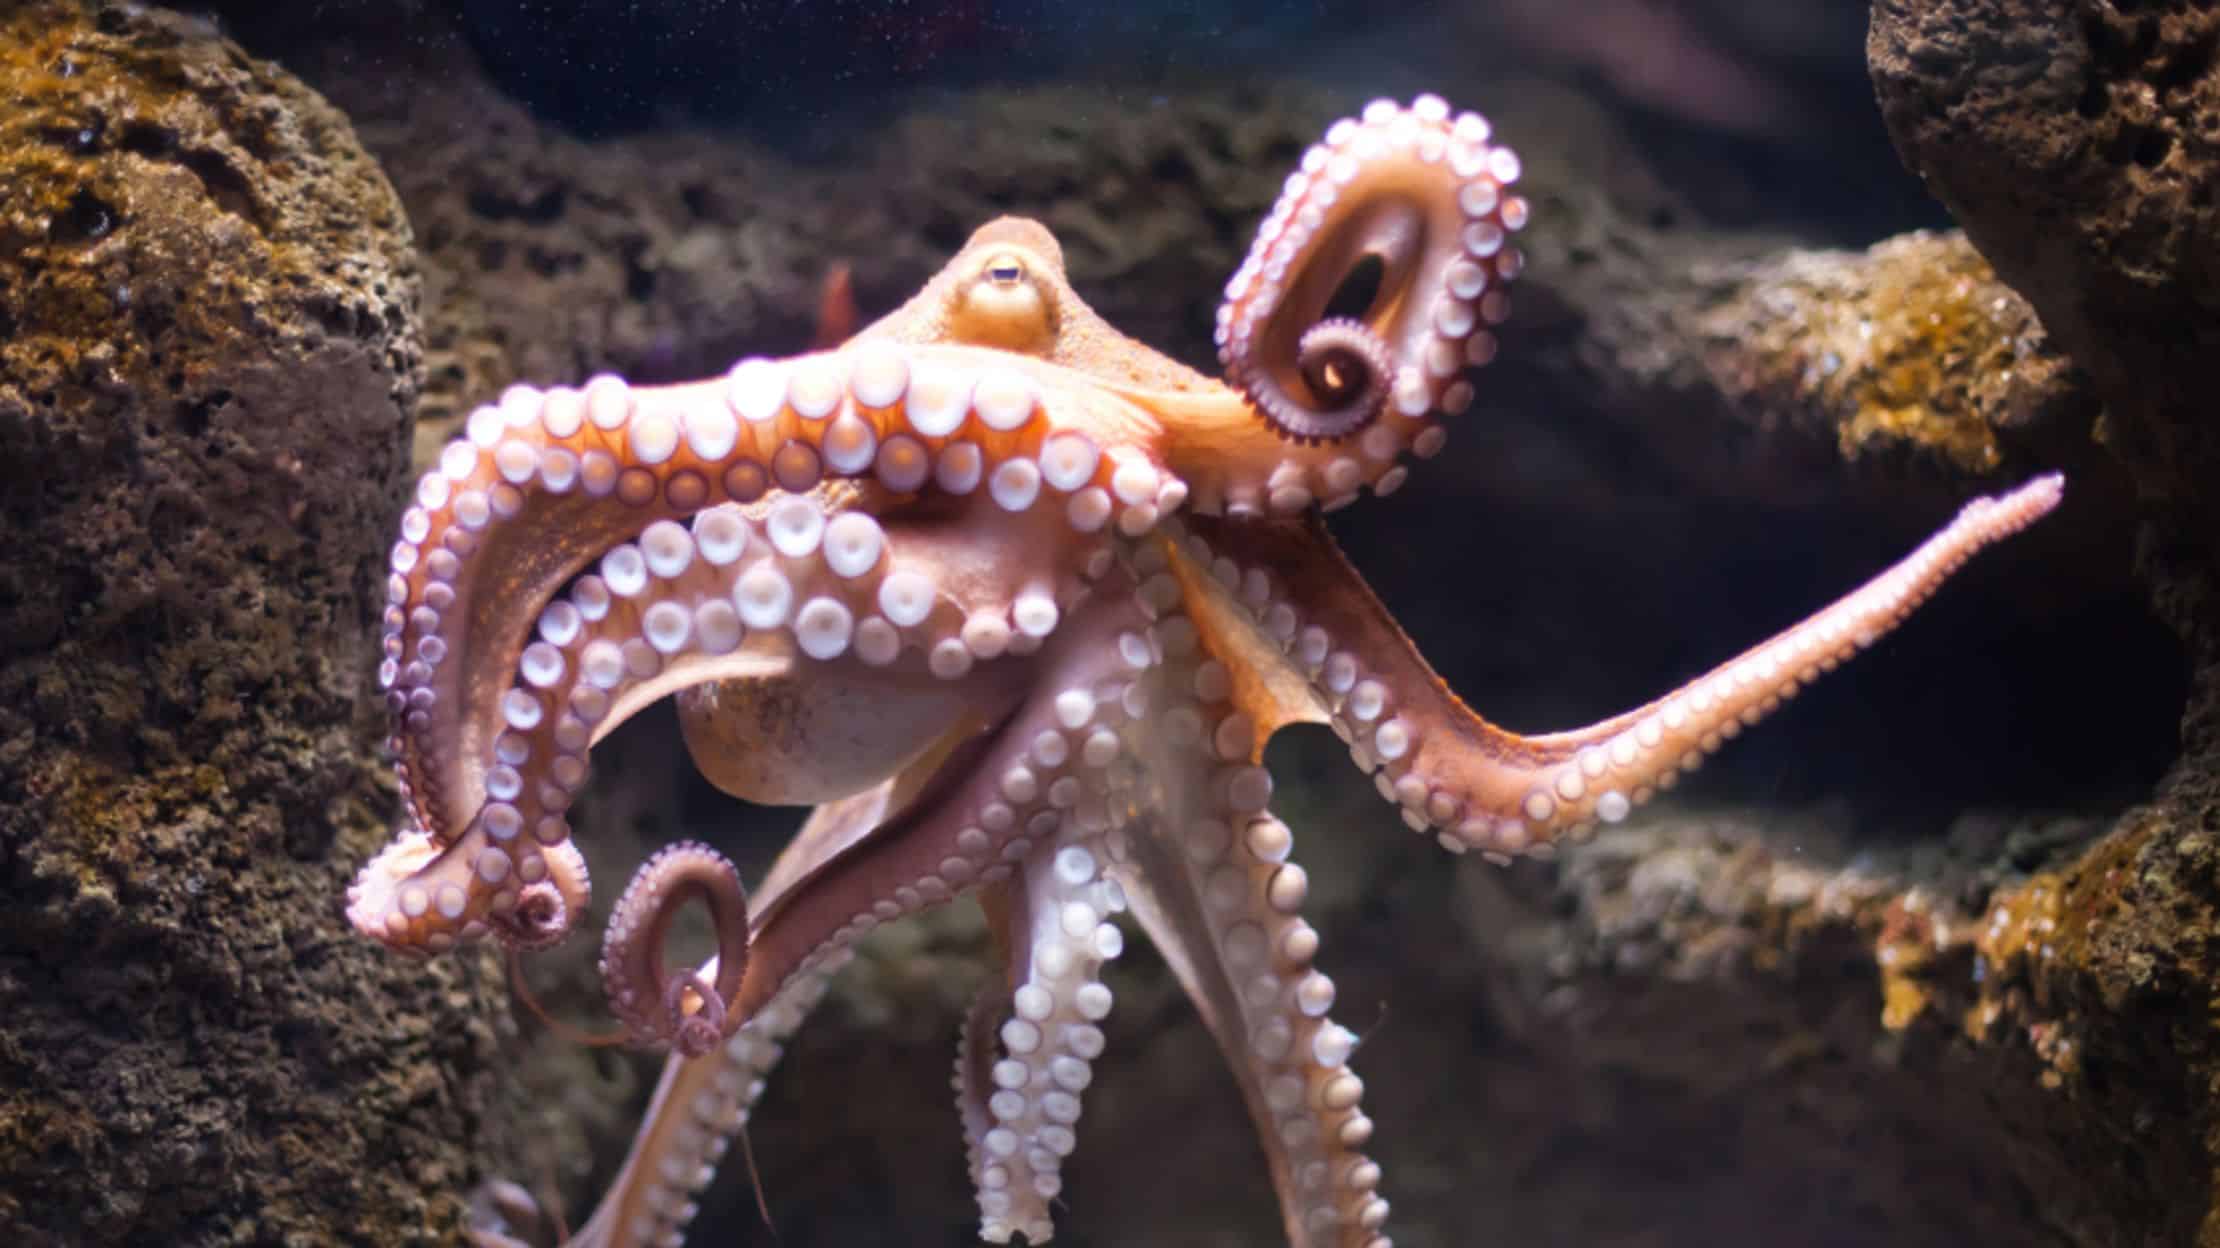 Arm of the Octopus